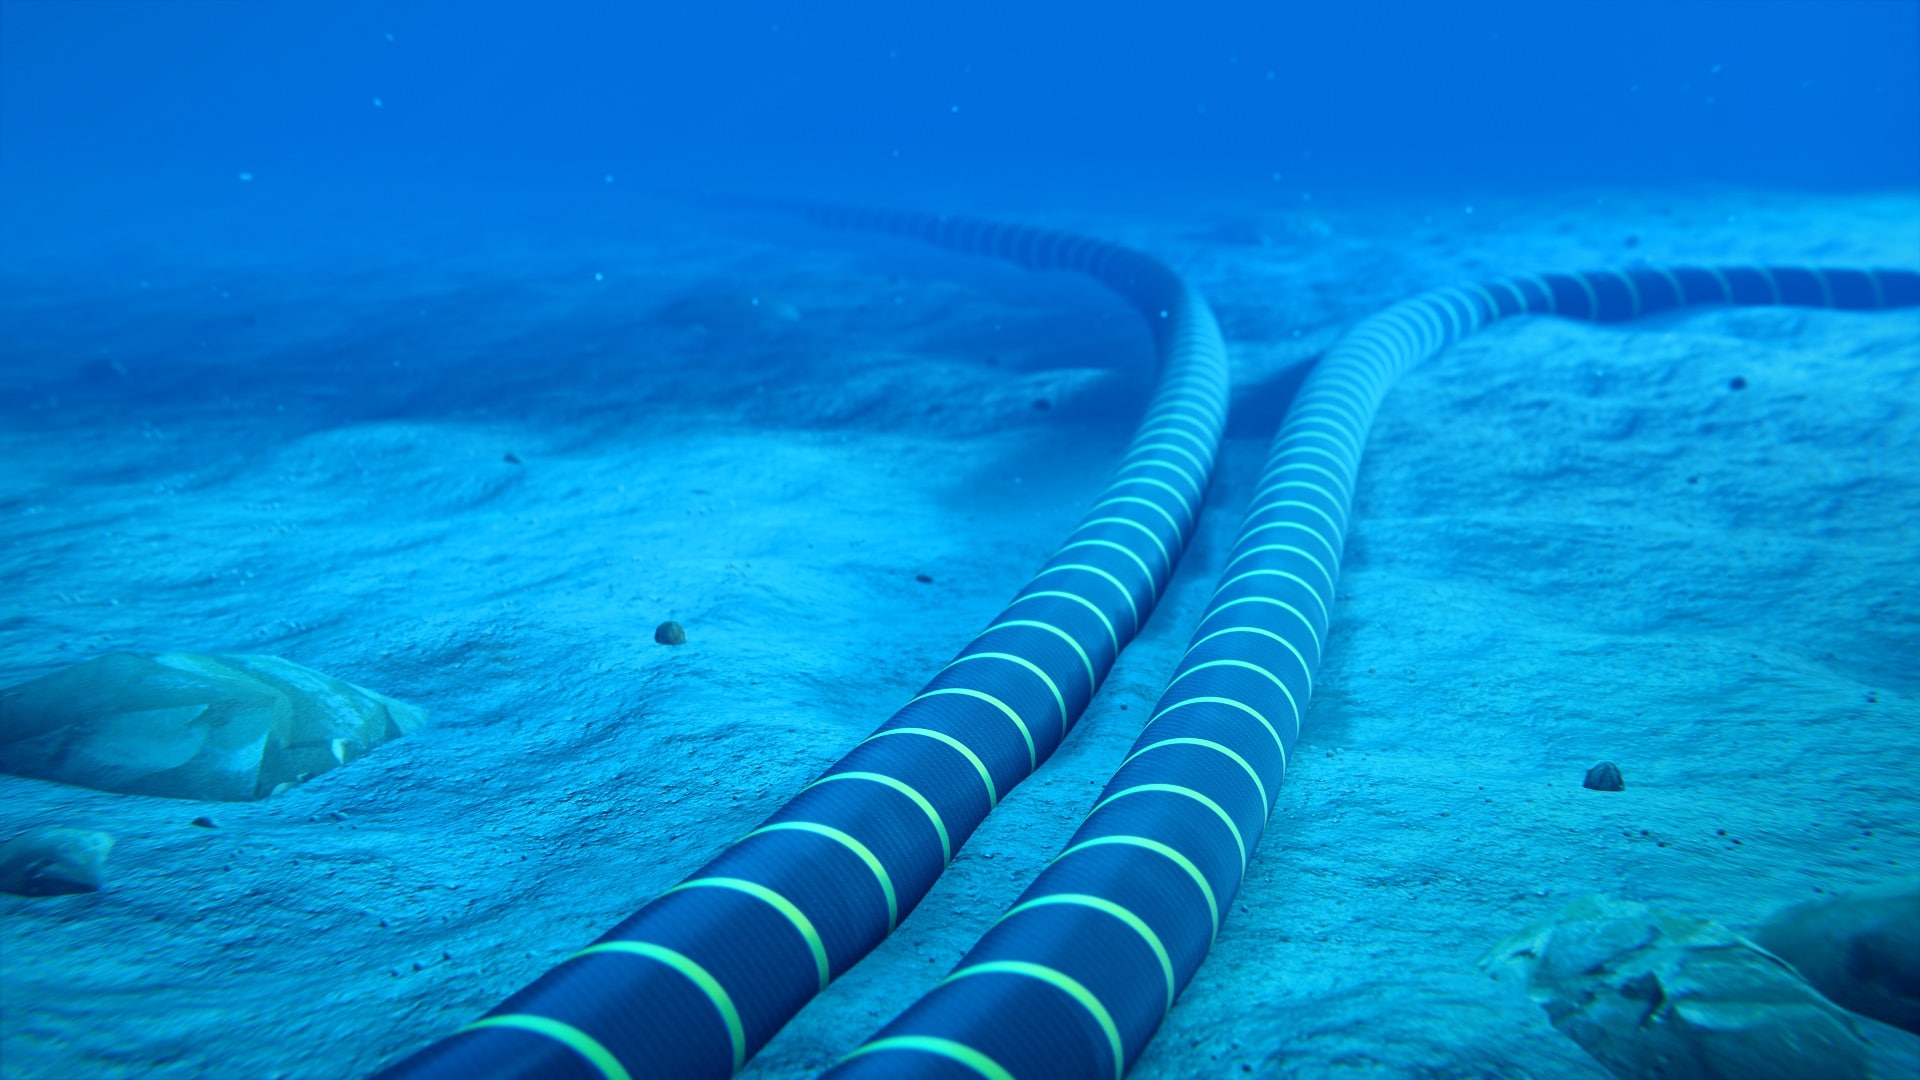 Brazil will have another high-speed internet connection point to Europe. An underwater fiber optic cable will connect the cities of Fortaleza, in Ceará state, to Sines, in Portugal, and will allow for 72 terabits per second data traffic and 60 milliseconds latency.